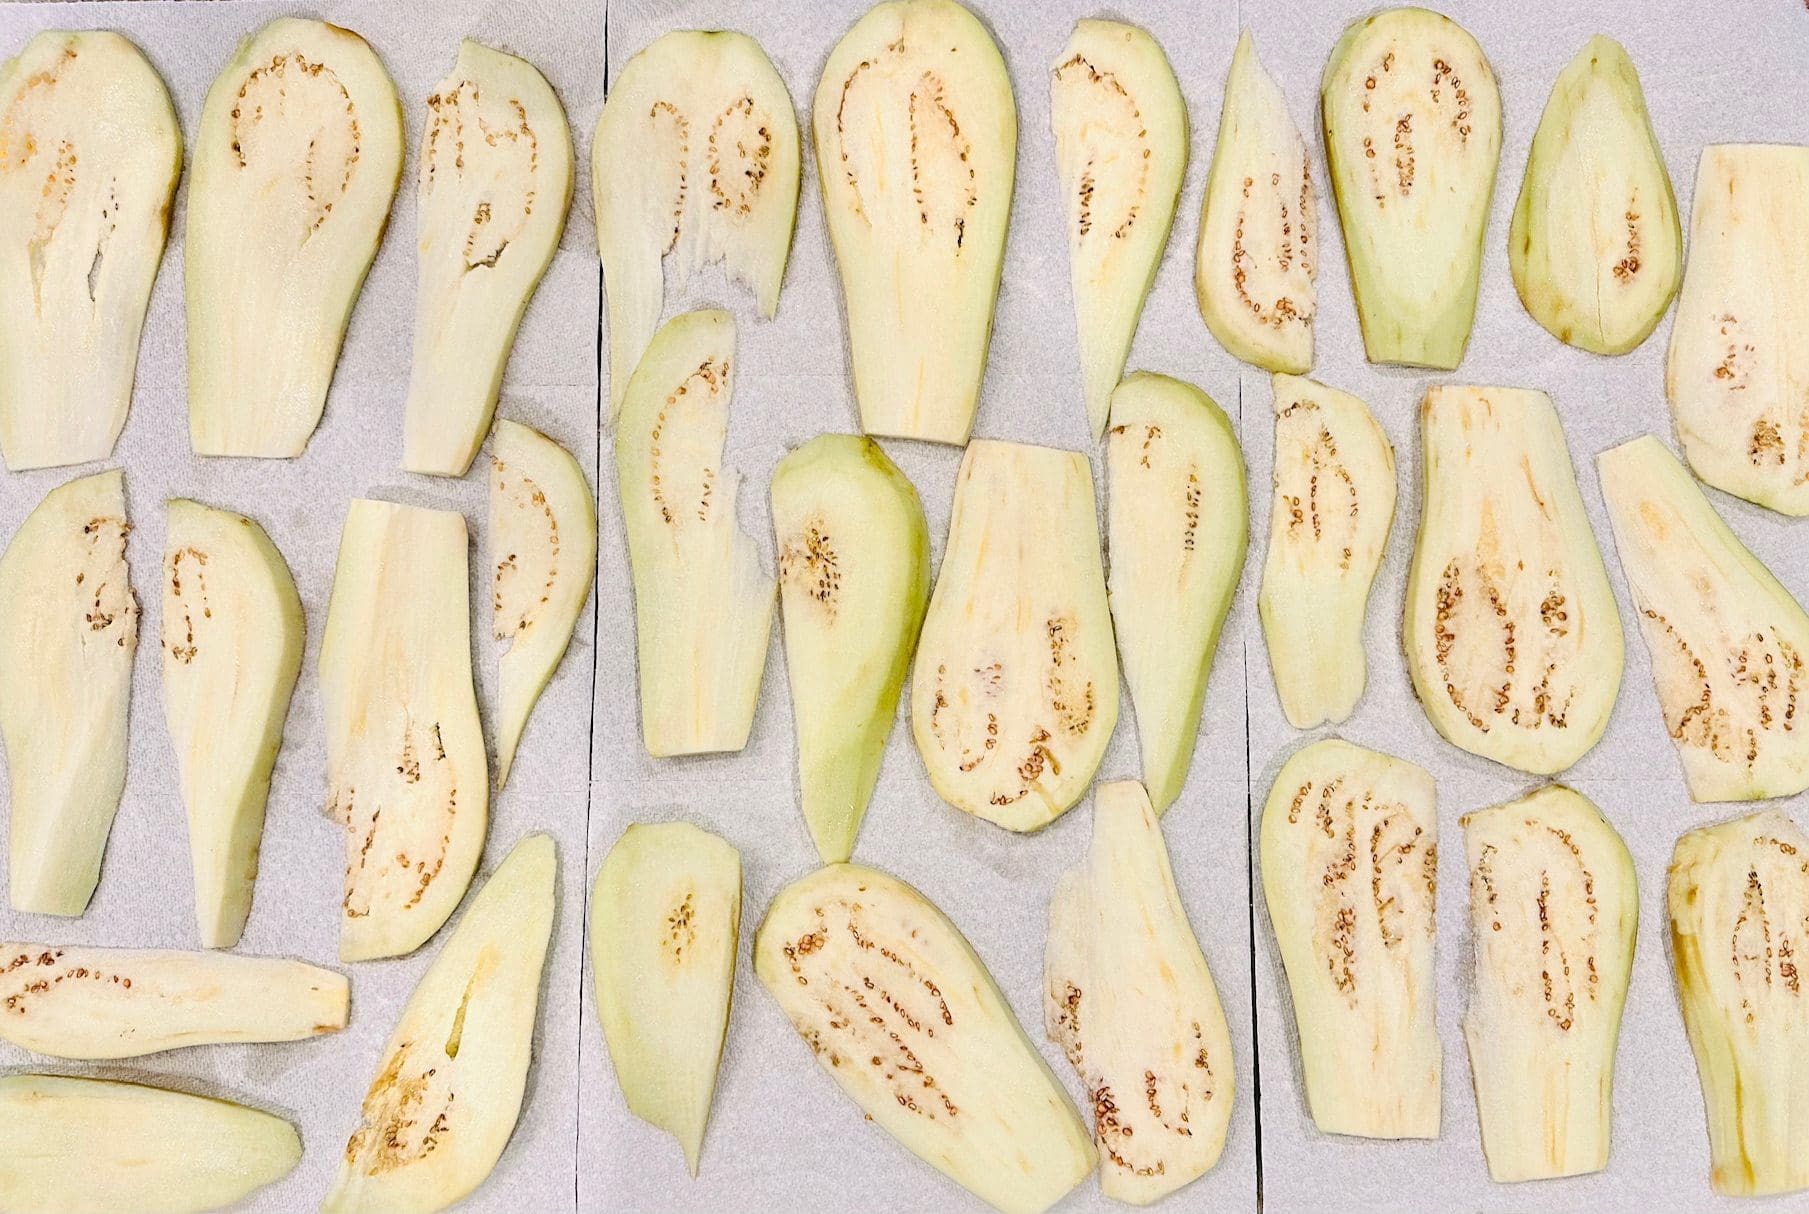 Eggplant slices on paper towels